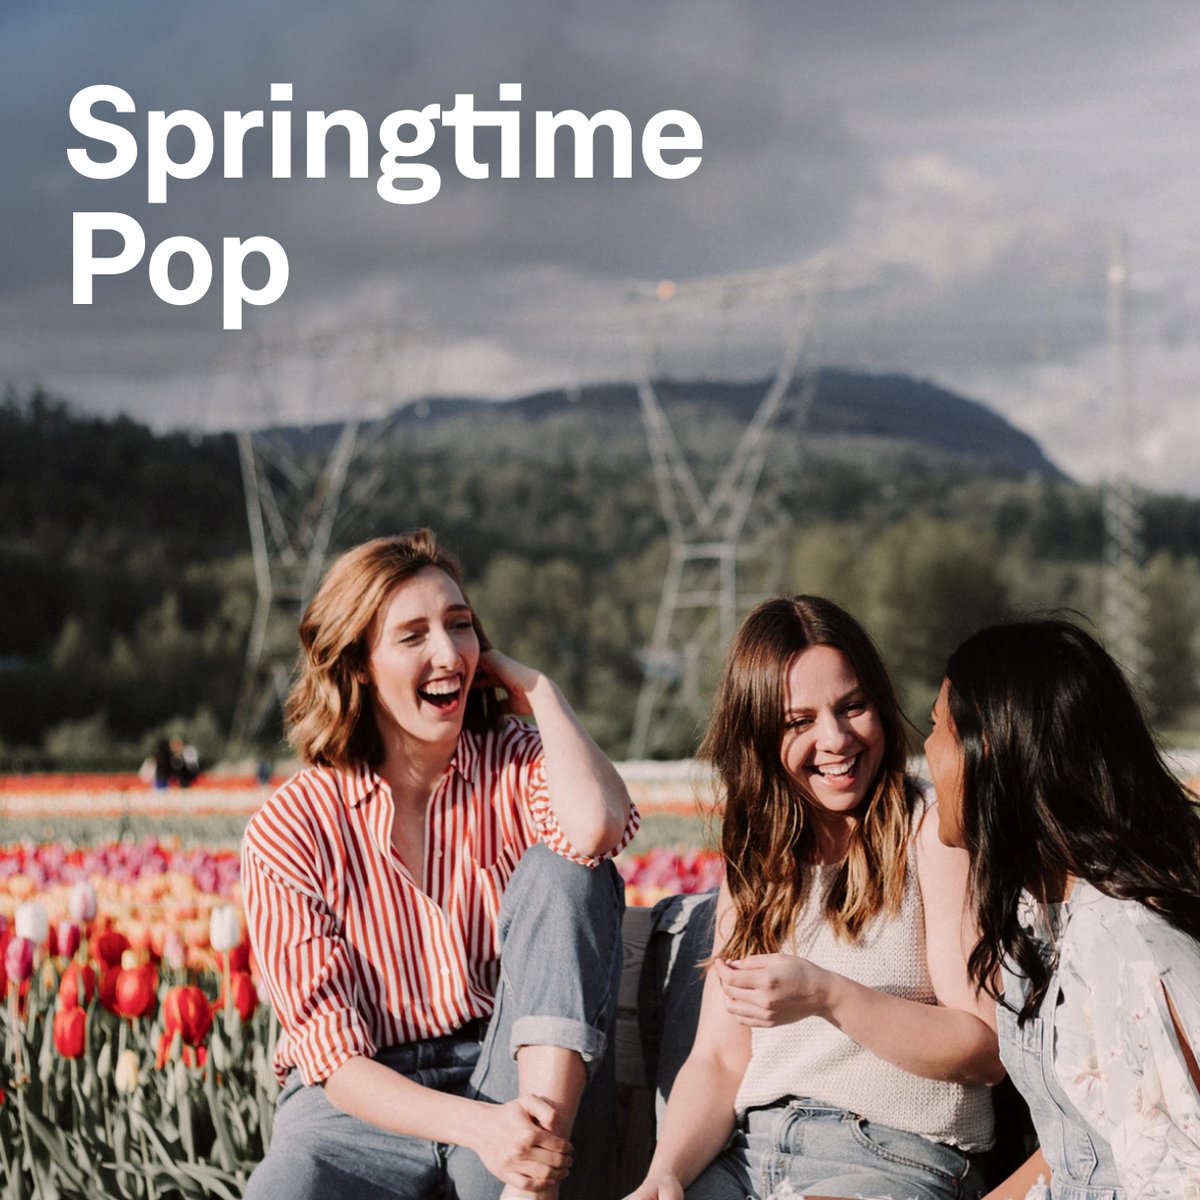 The excitement is in the air! Greener, warmer, brighter times. Soundtrack the spring feeling with our ‘Springtime Pop’ playlist. 🎵🌄 Schedule it today: bit.ly/4aiLQSi #MusicforBusiness #SoundtrackYourBrand